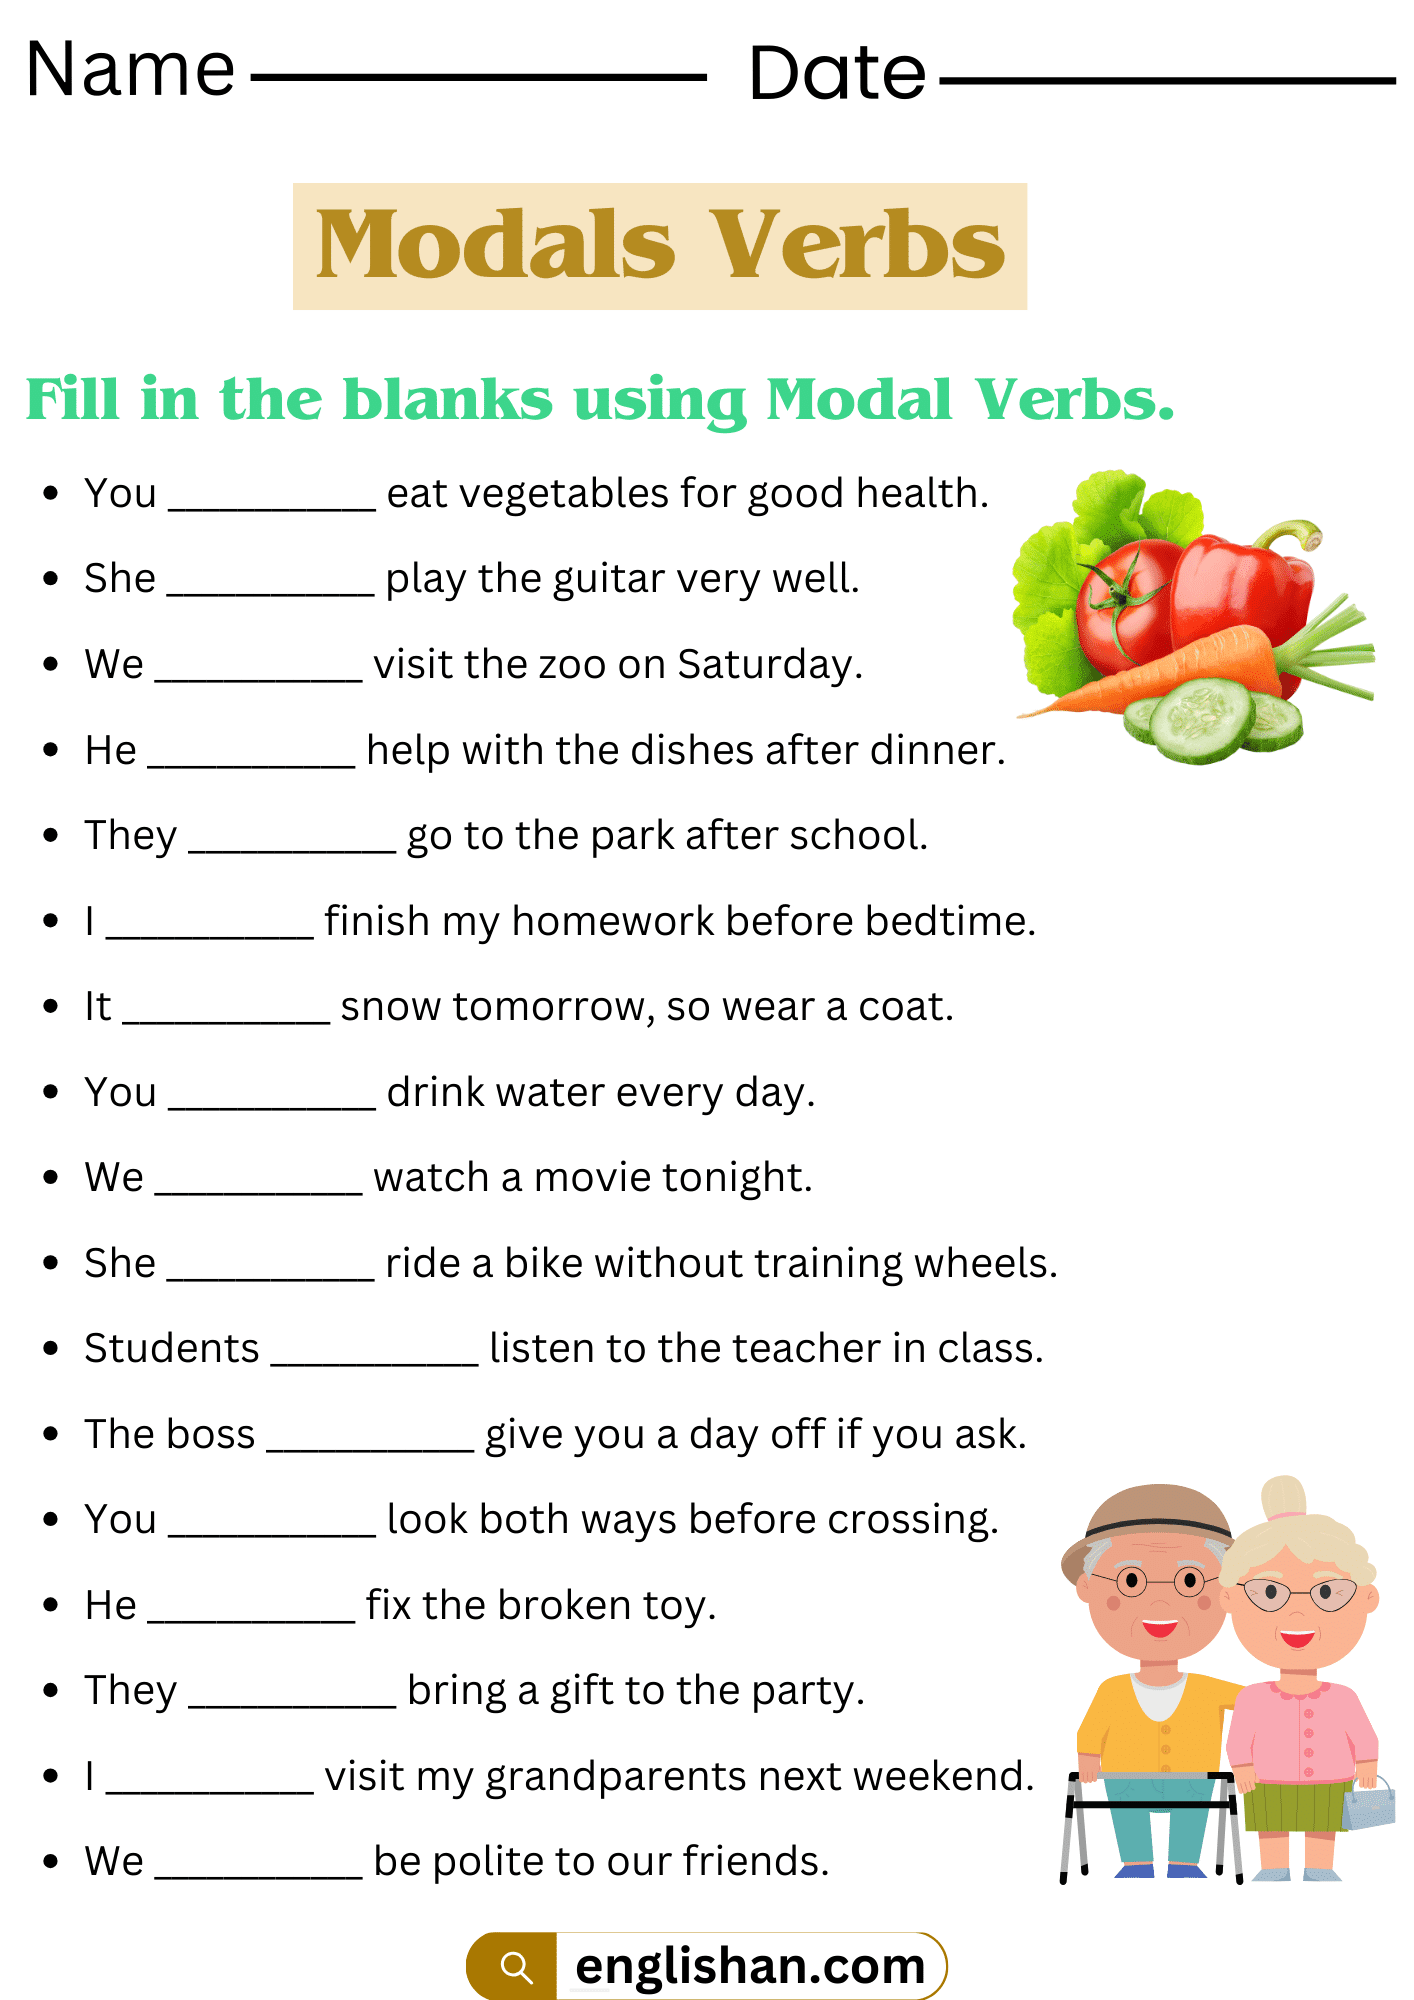 25 Fill in the blanks using Modals Verbs Worksheets.